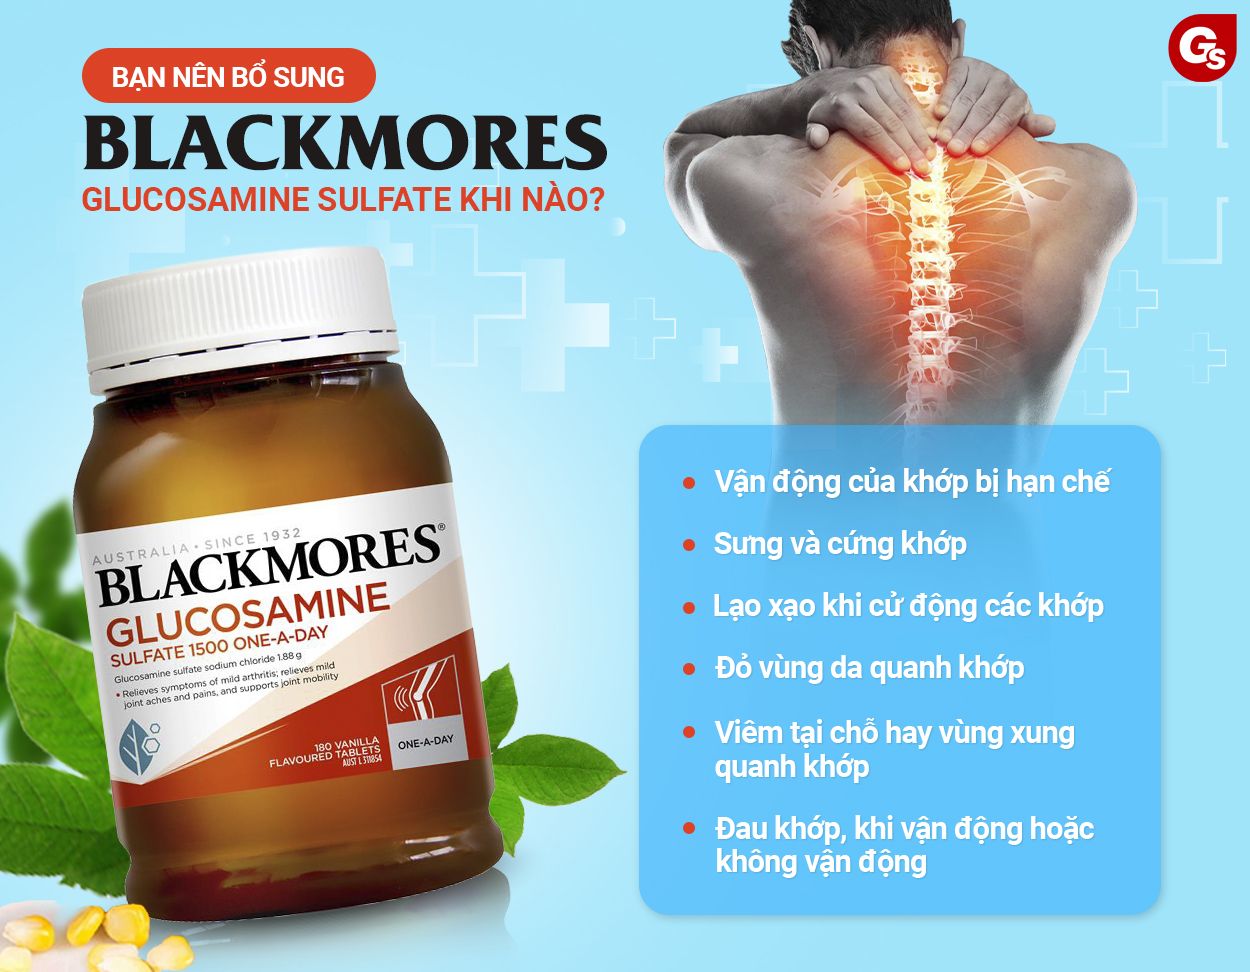 blackmores-glucosamine-sulfate-1500-180-tablets-gymstore-2